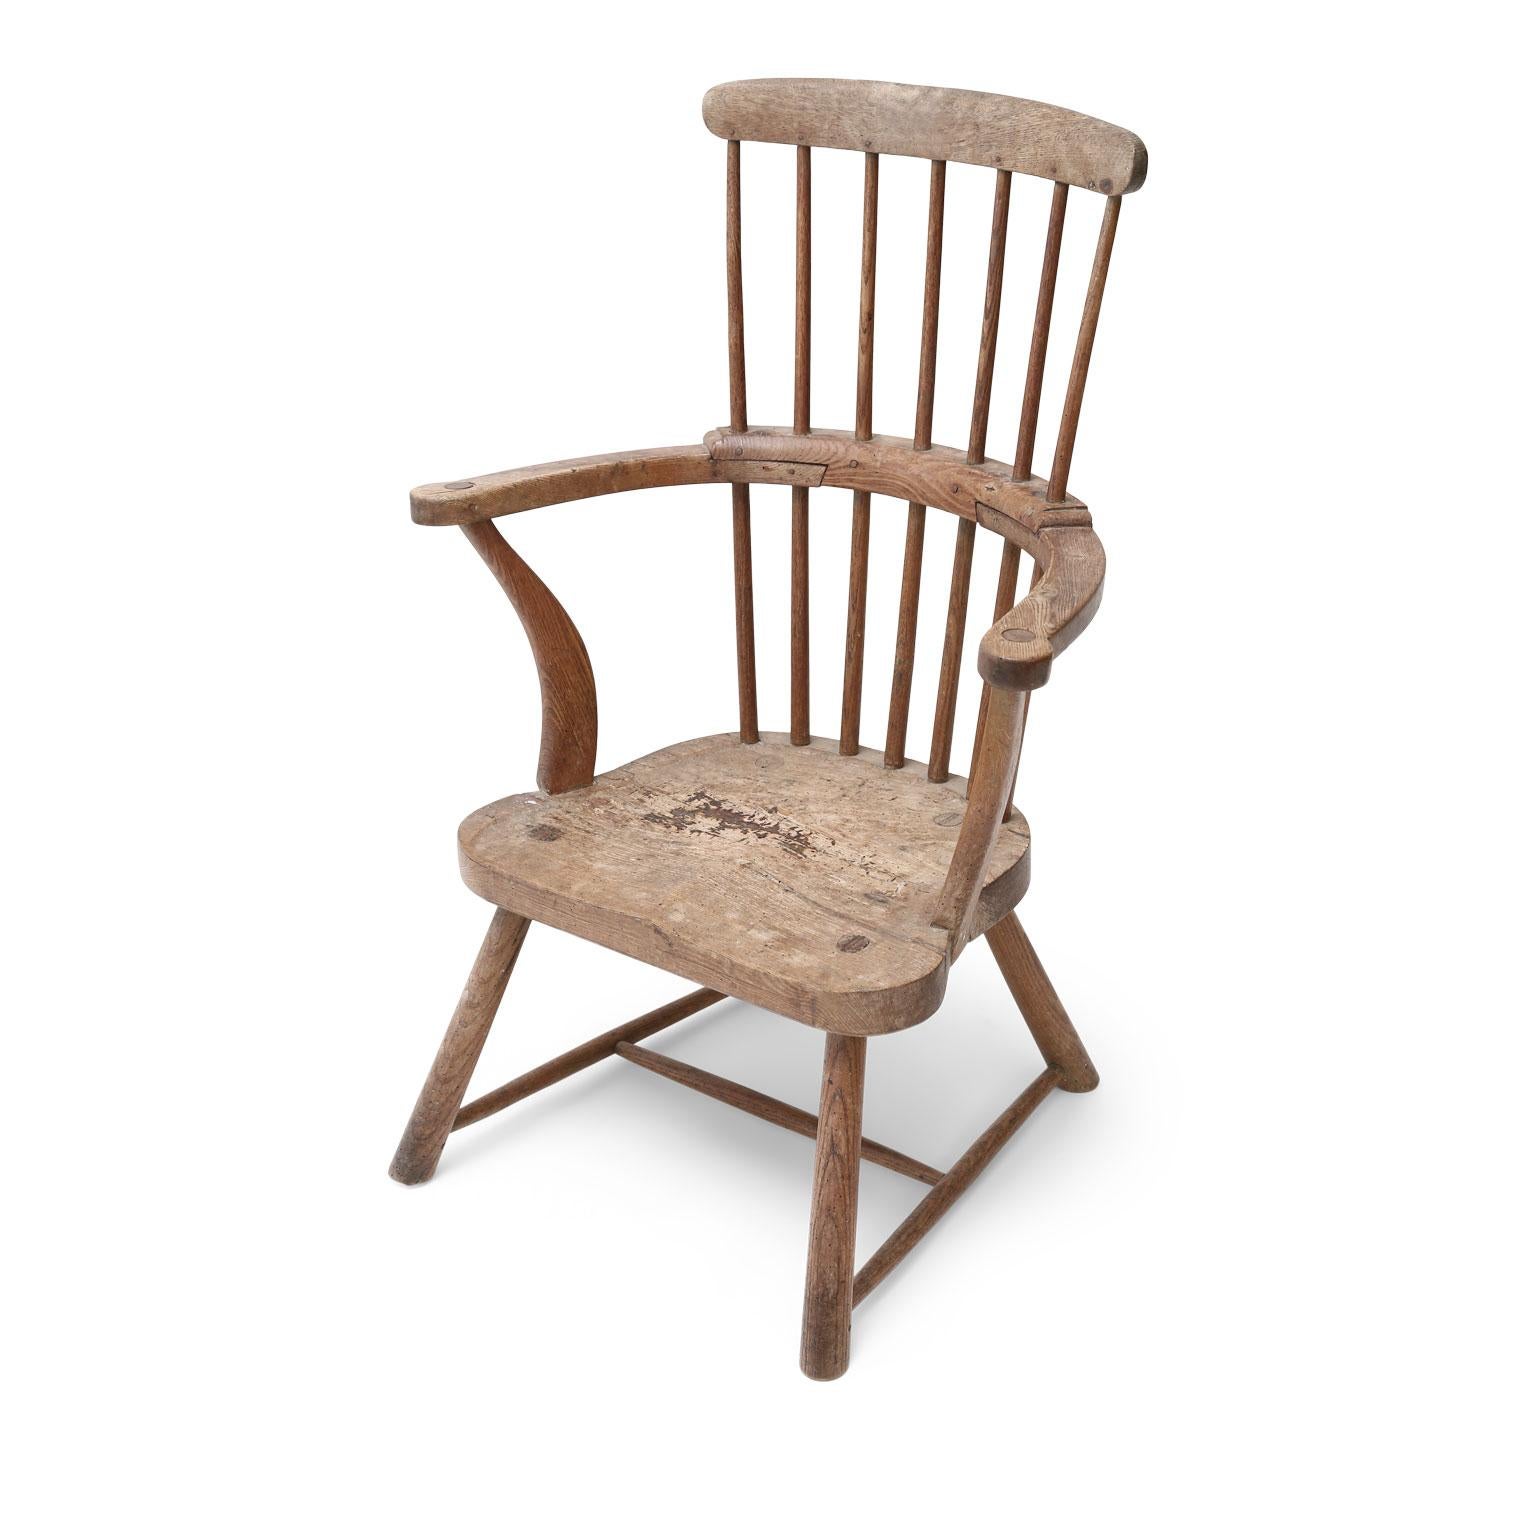 West Country vernacular Windsor armchair constructed (circa 1780-1810) from elm and oak in a comb back style. Nice thick plank seat. Perfect as a fireside chair.